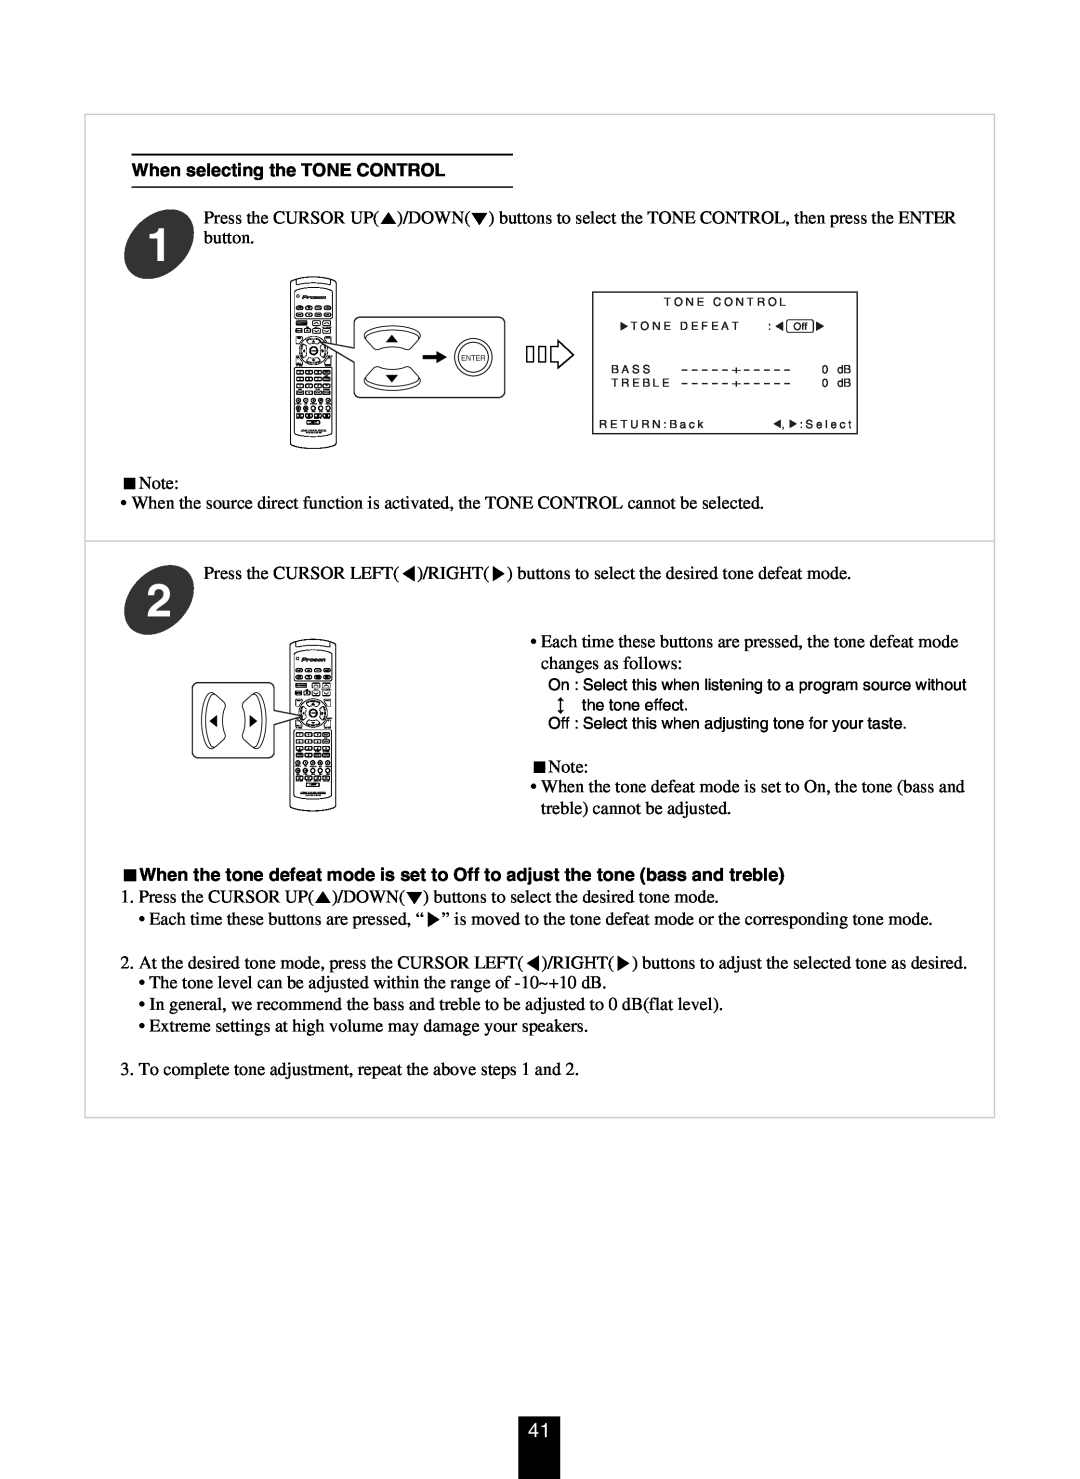 DTS RV4700 DTS-ES manual When selecting the TONE CONTROL 